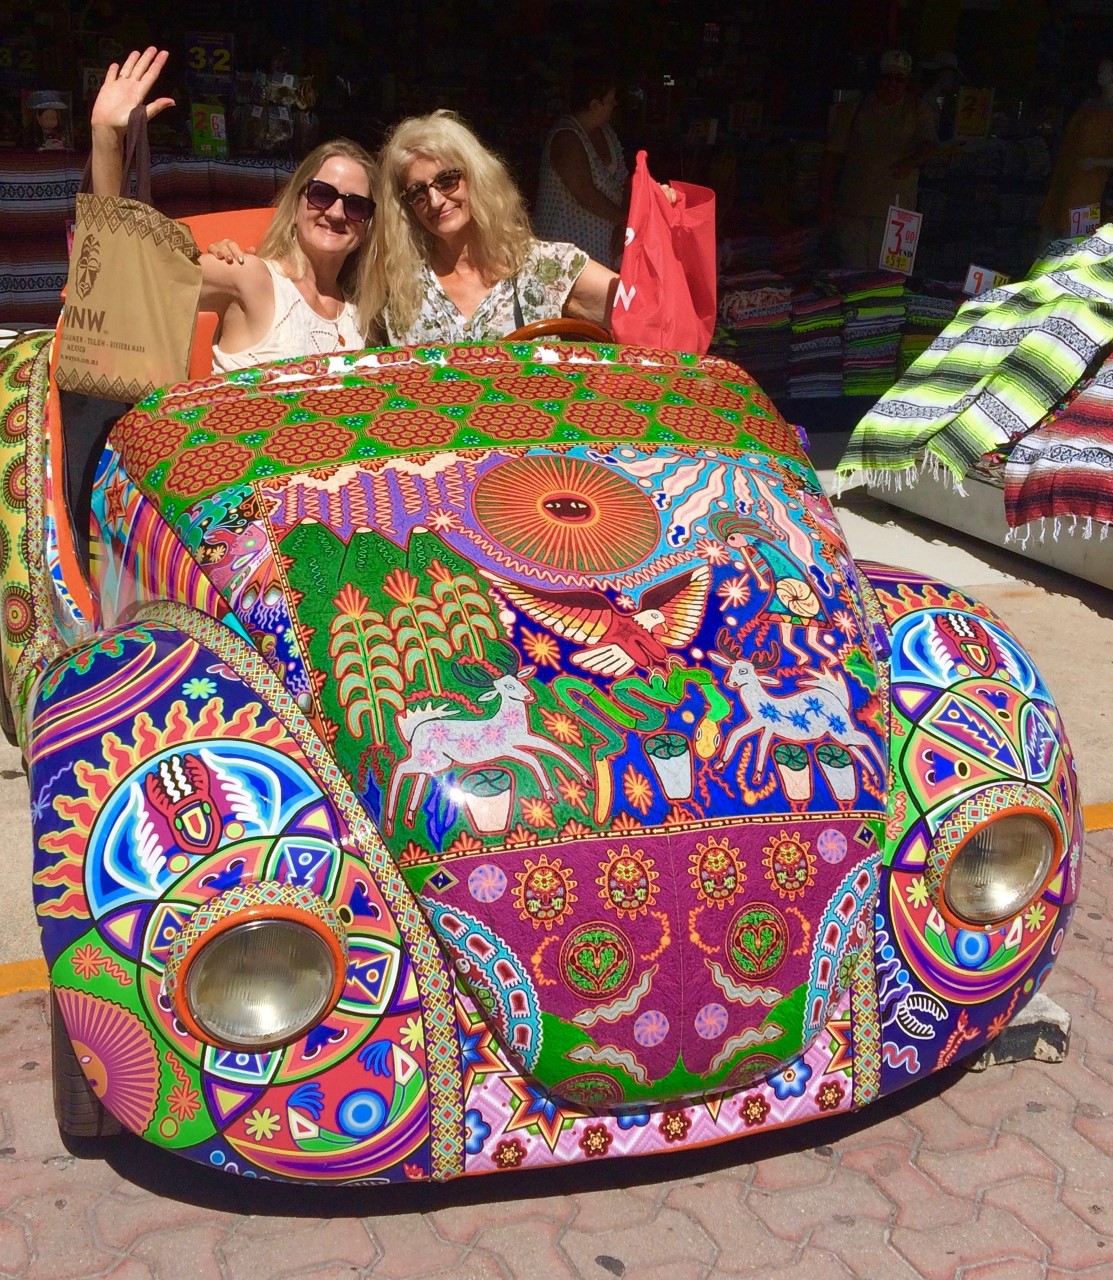 two women sitting in a colorfully painted car